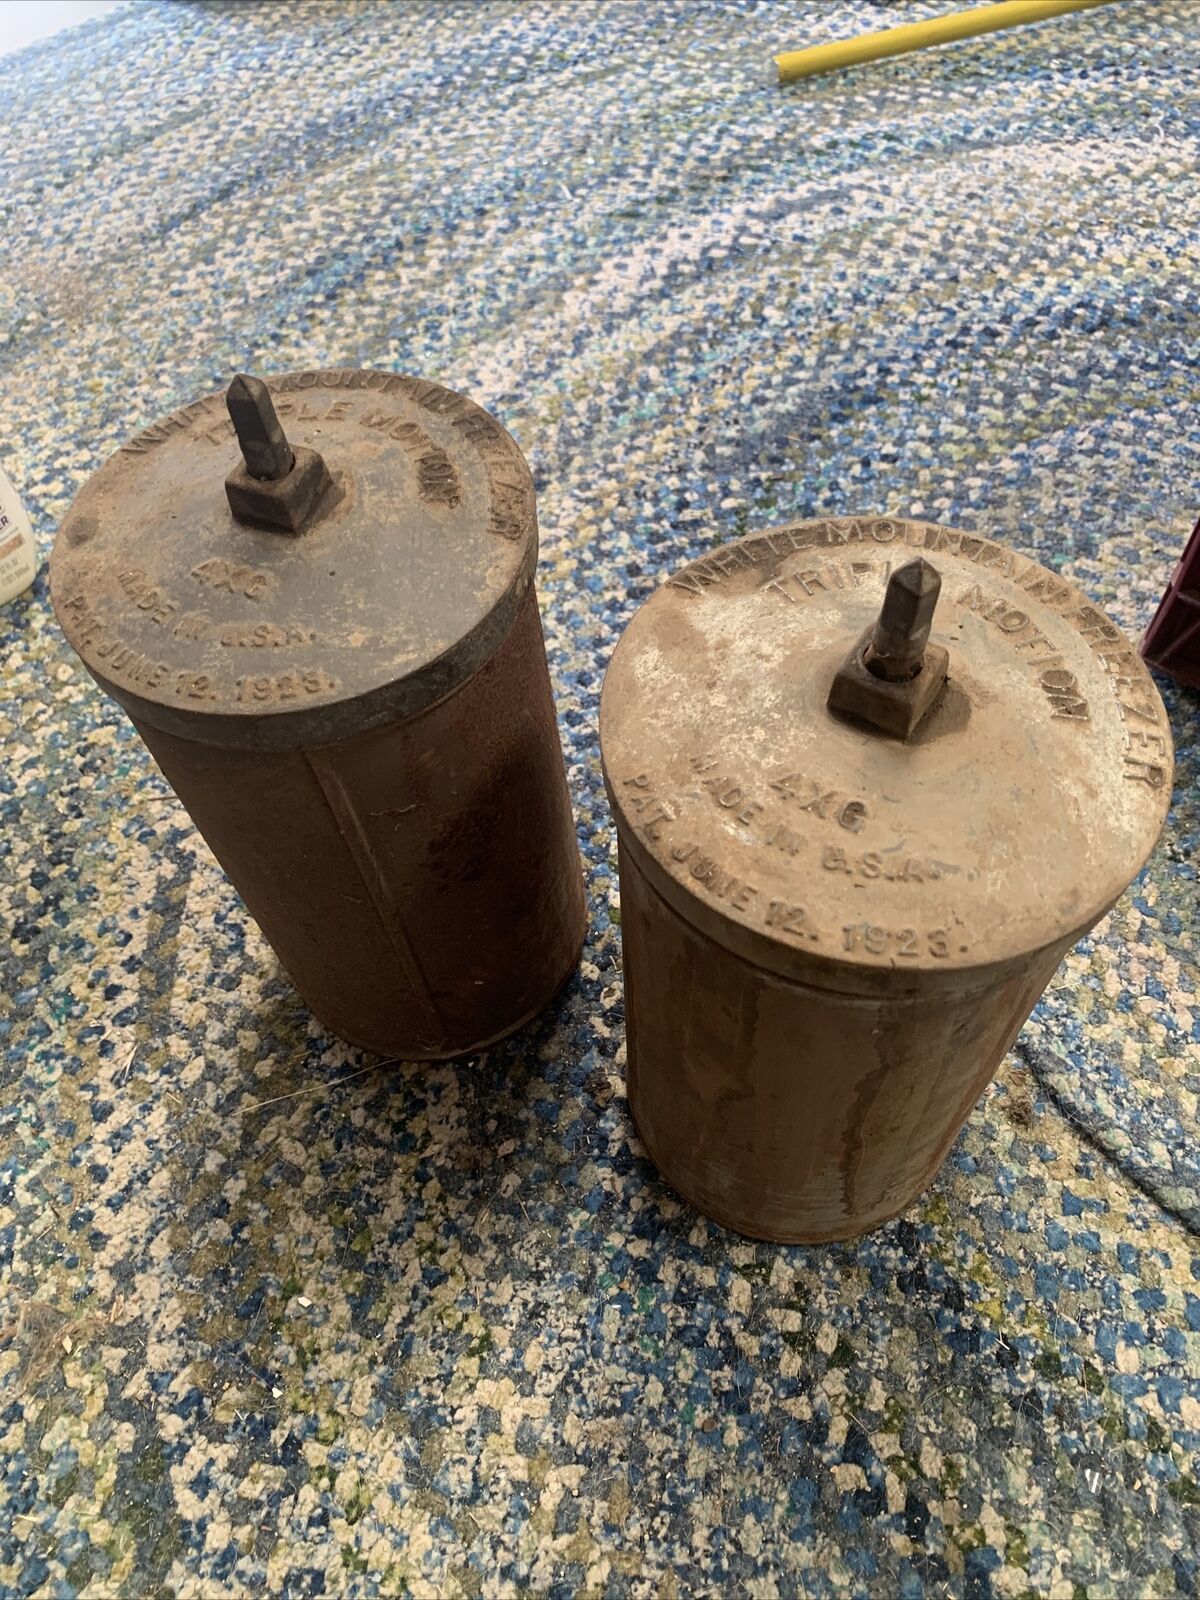 2 Antique 1923 White Mountain Ice Cream Maker Canisters & Paddles Metal Crank